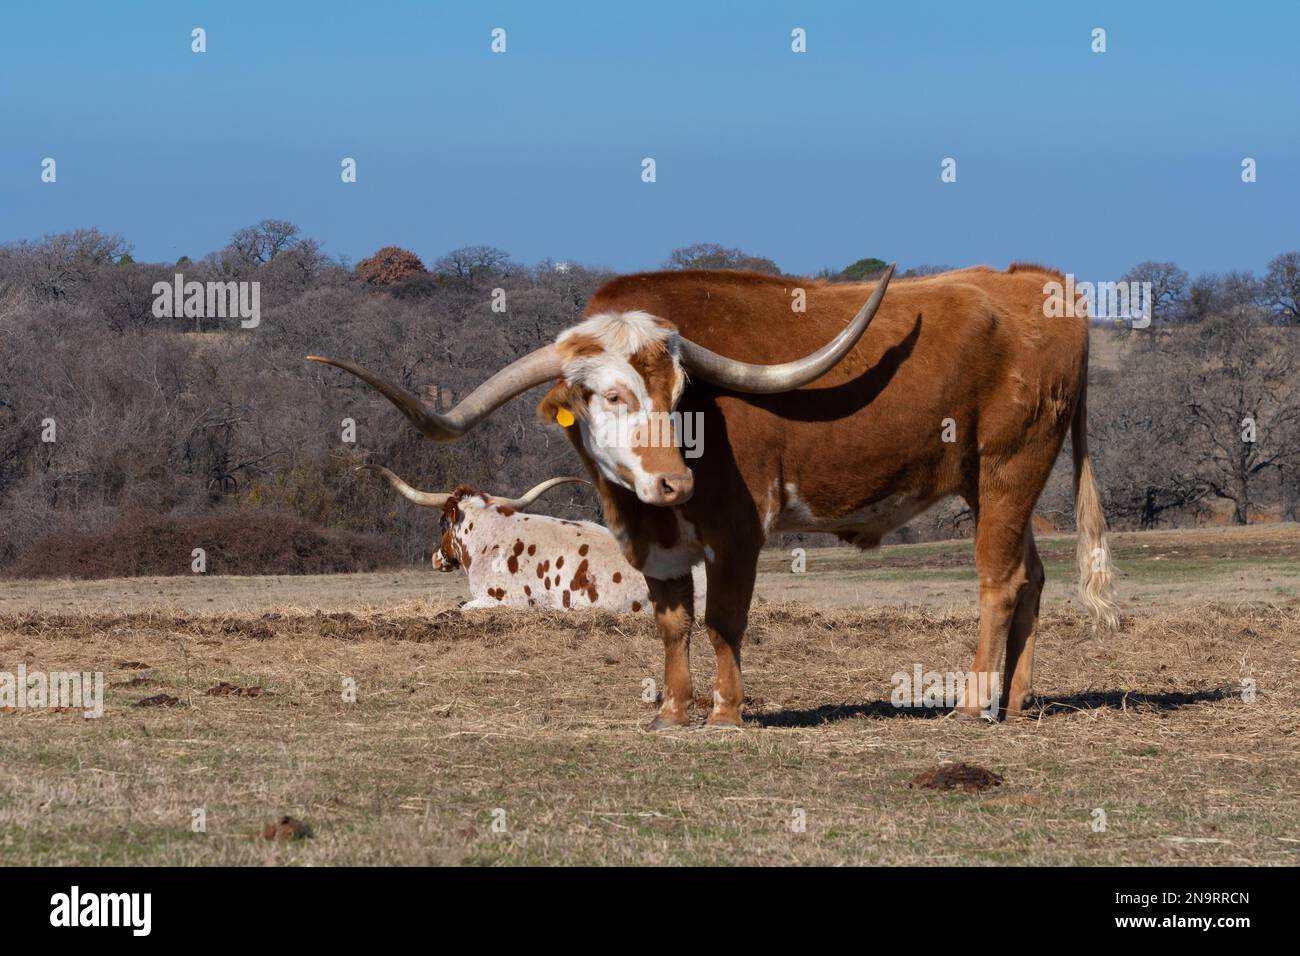 An orange Longhorn bull with a large stipe on its white face and long, curved horns standing in a farm pasture while a white cow with spots rests in t Stock Photo